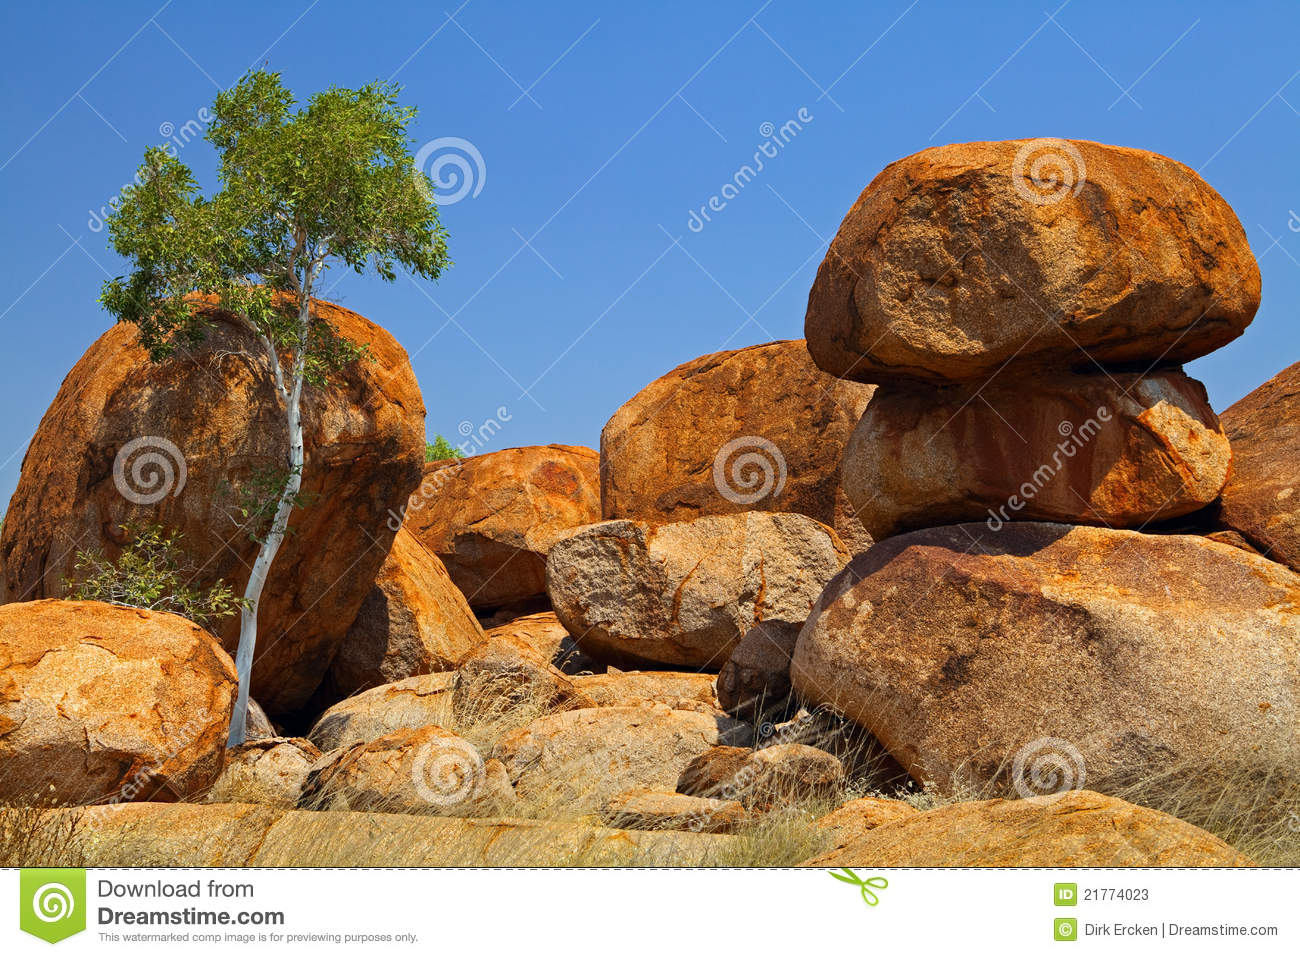 Devils Marbles clipart #2, Download drawings